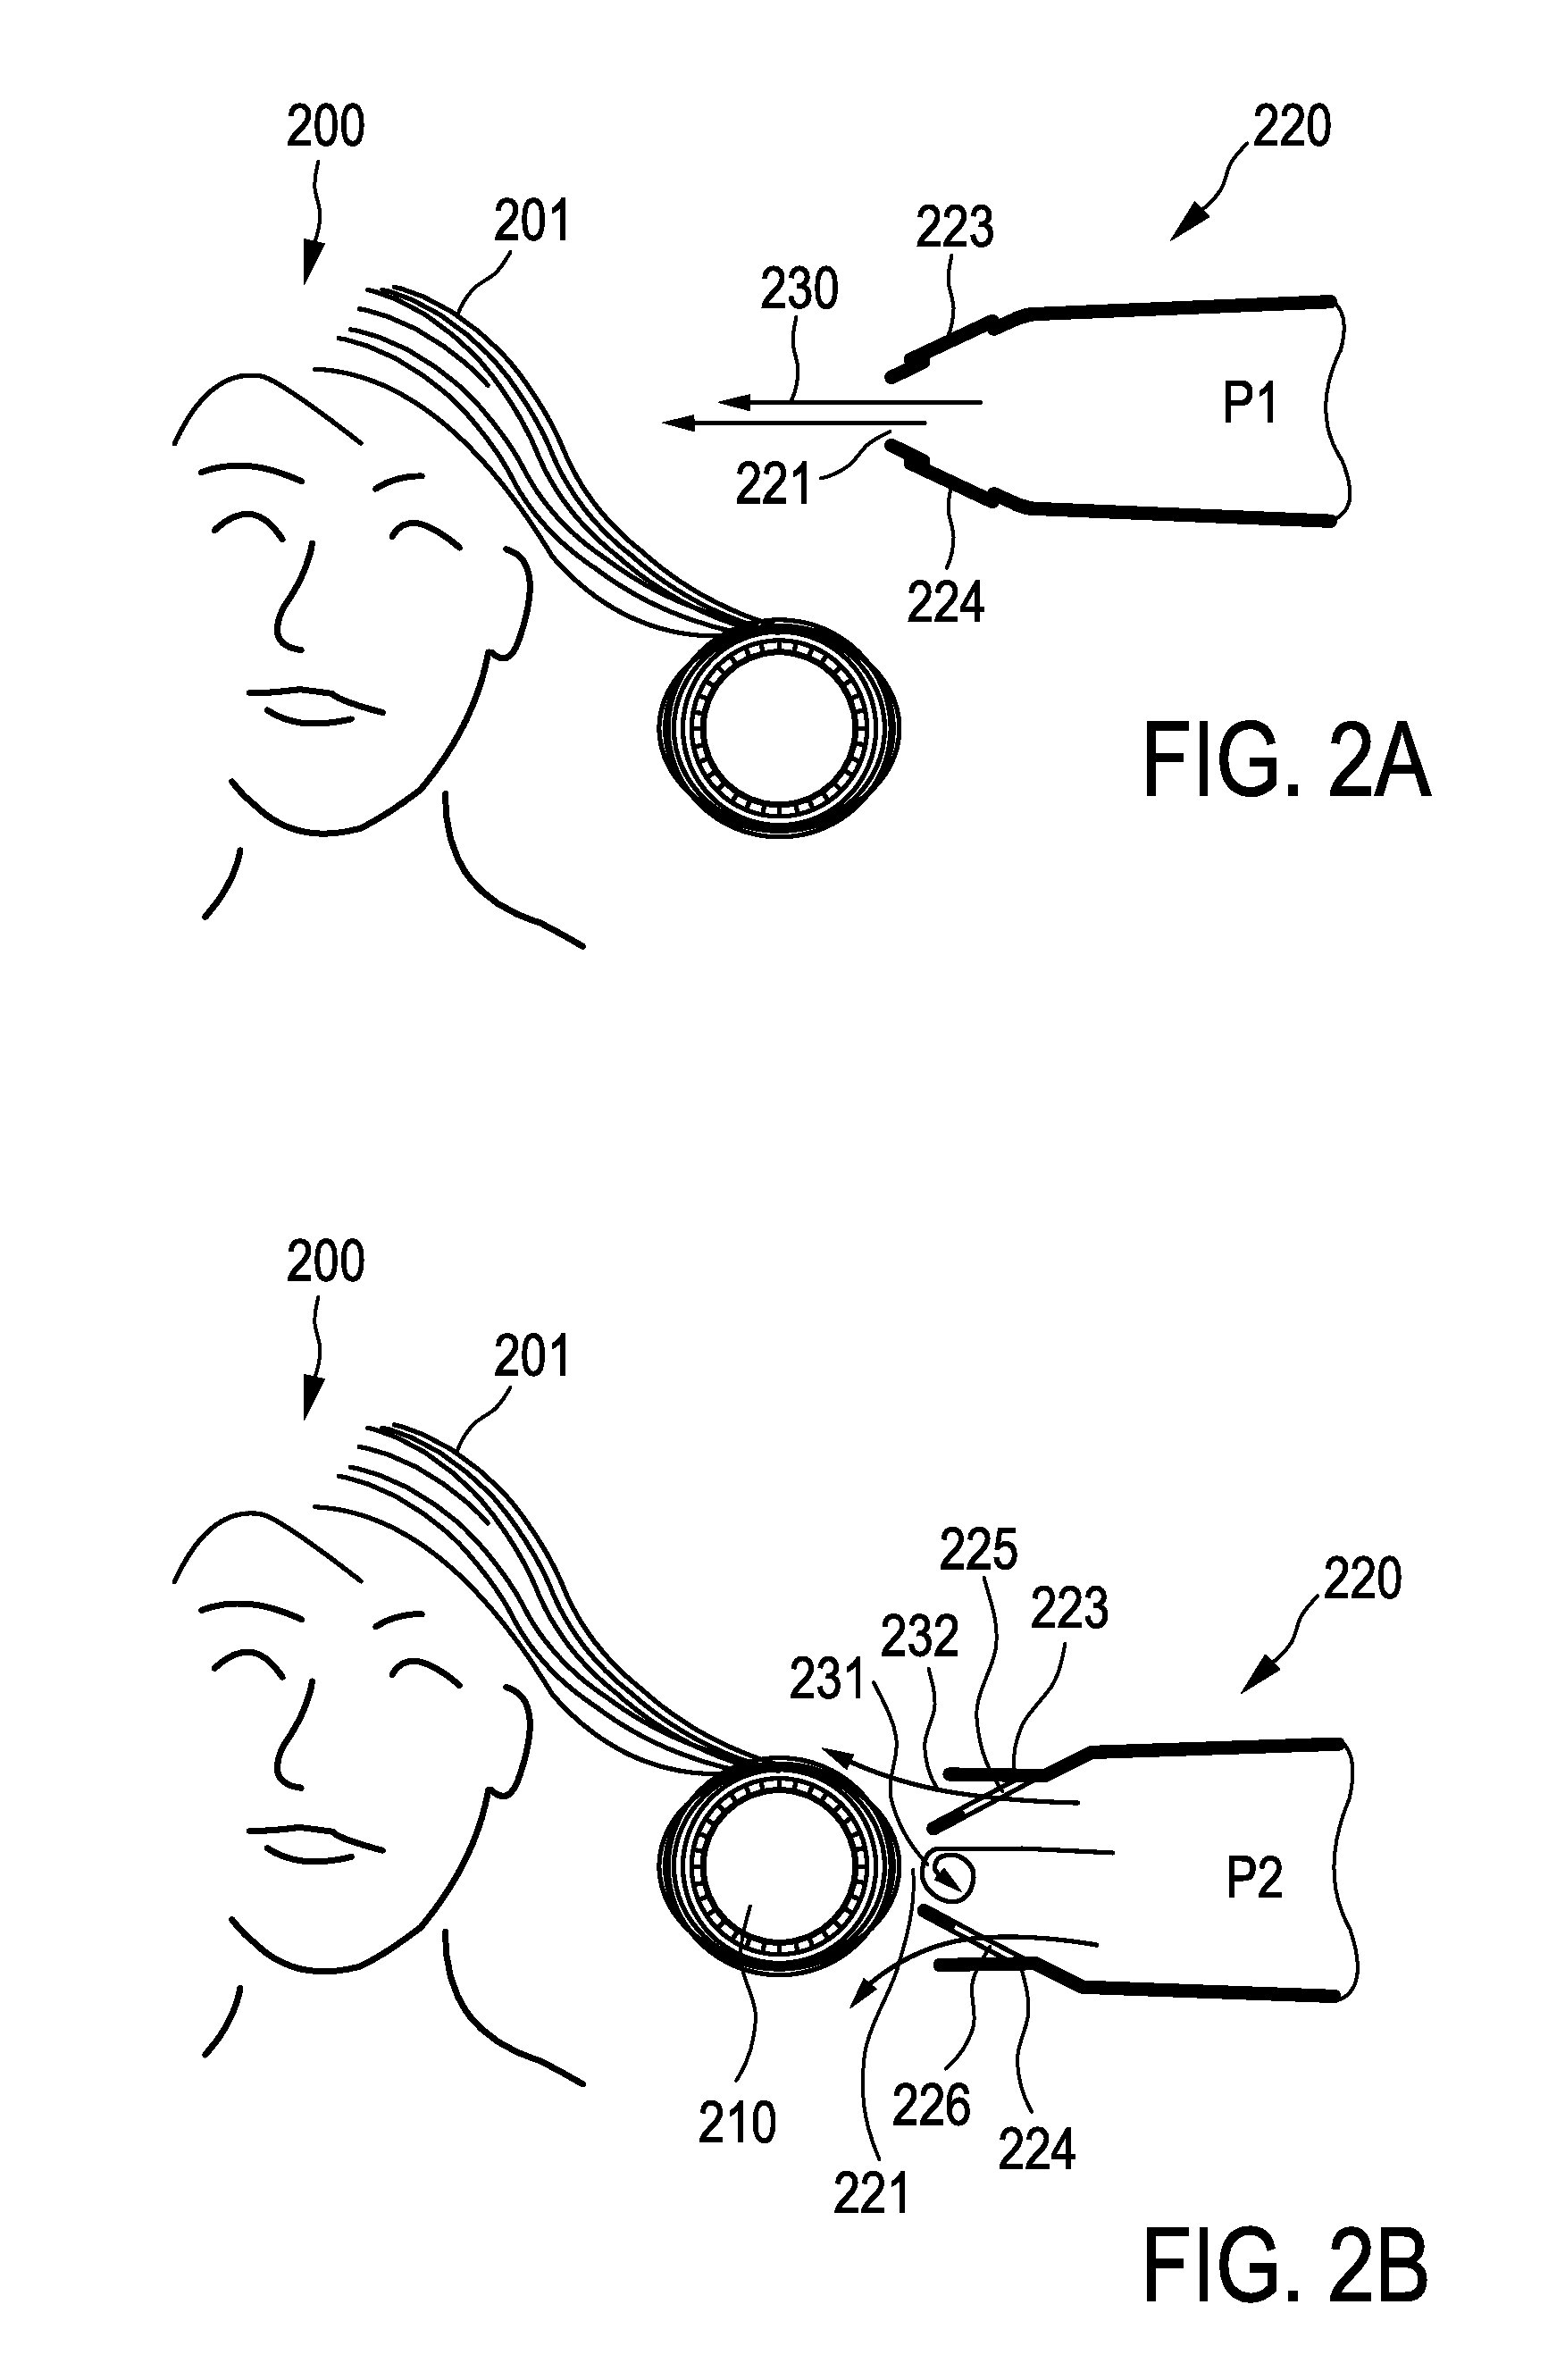 Hair dryer with air outlet arrangement